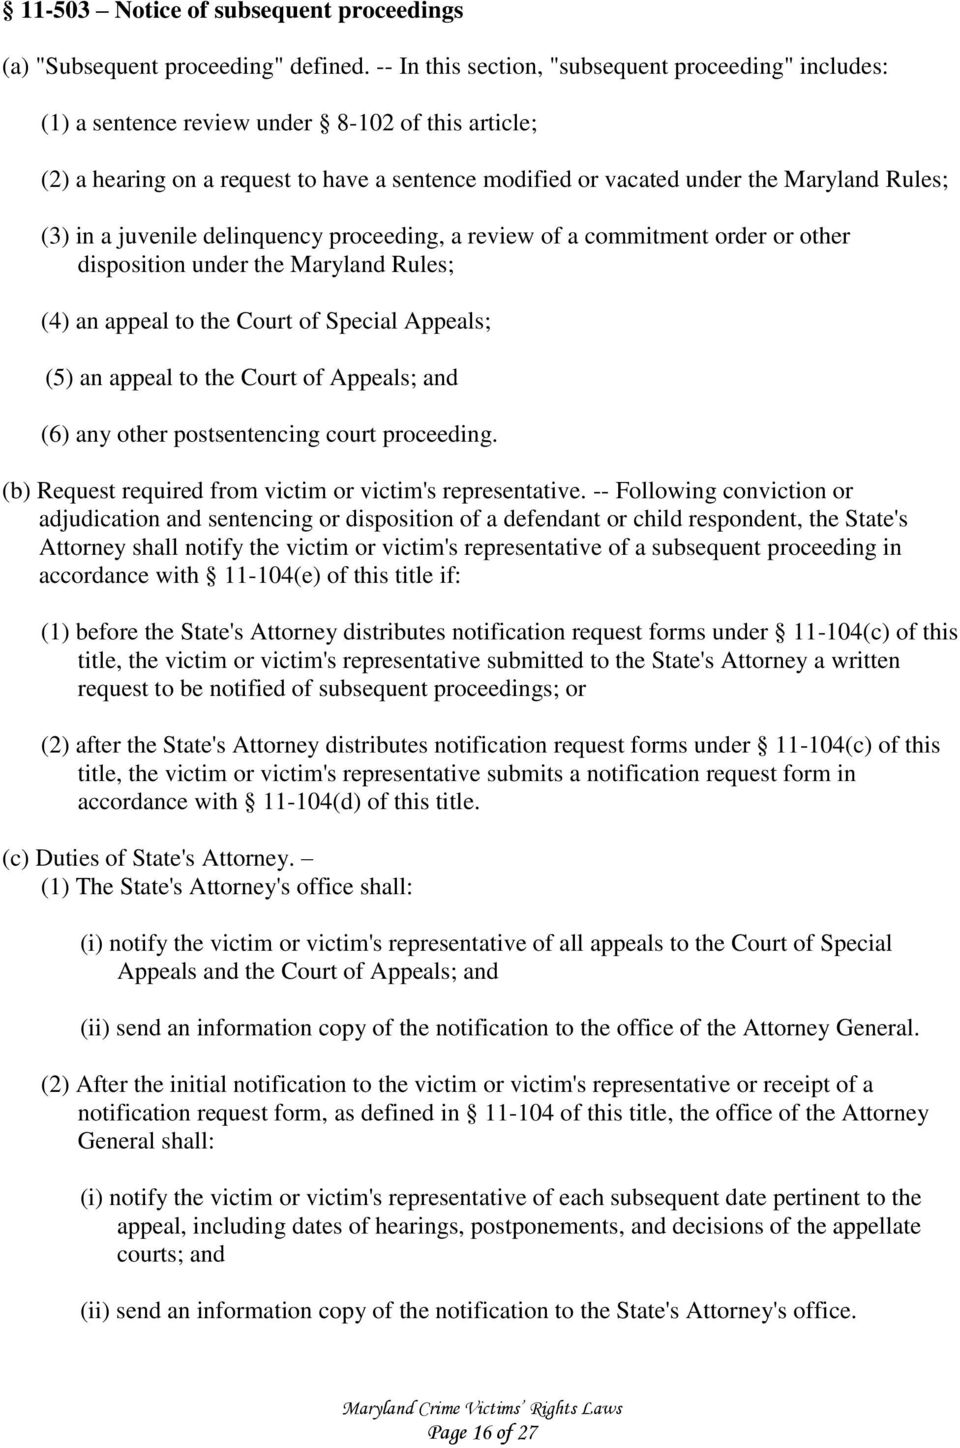 (3) in a juvenile delinquency proceeding, a review of a commitment order or other disposition under the Maryland Rules; (4) an appeal to the Court of Special Appeals; (5) an appeal to the Court of